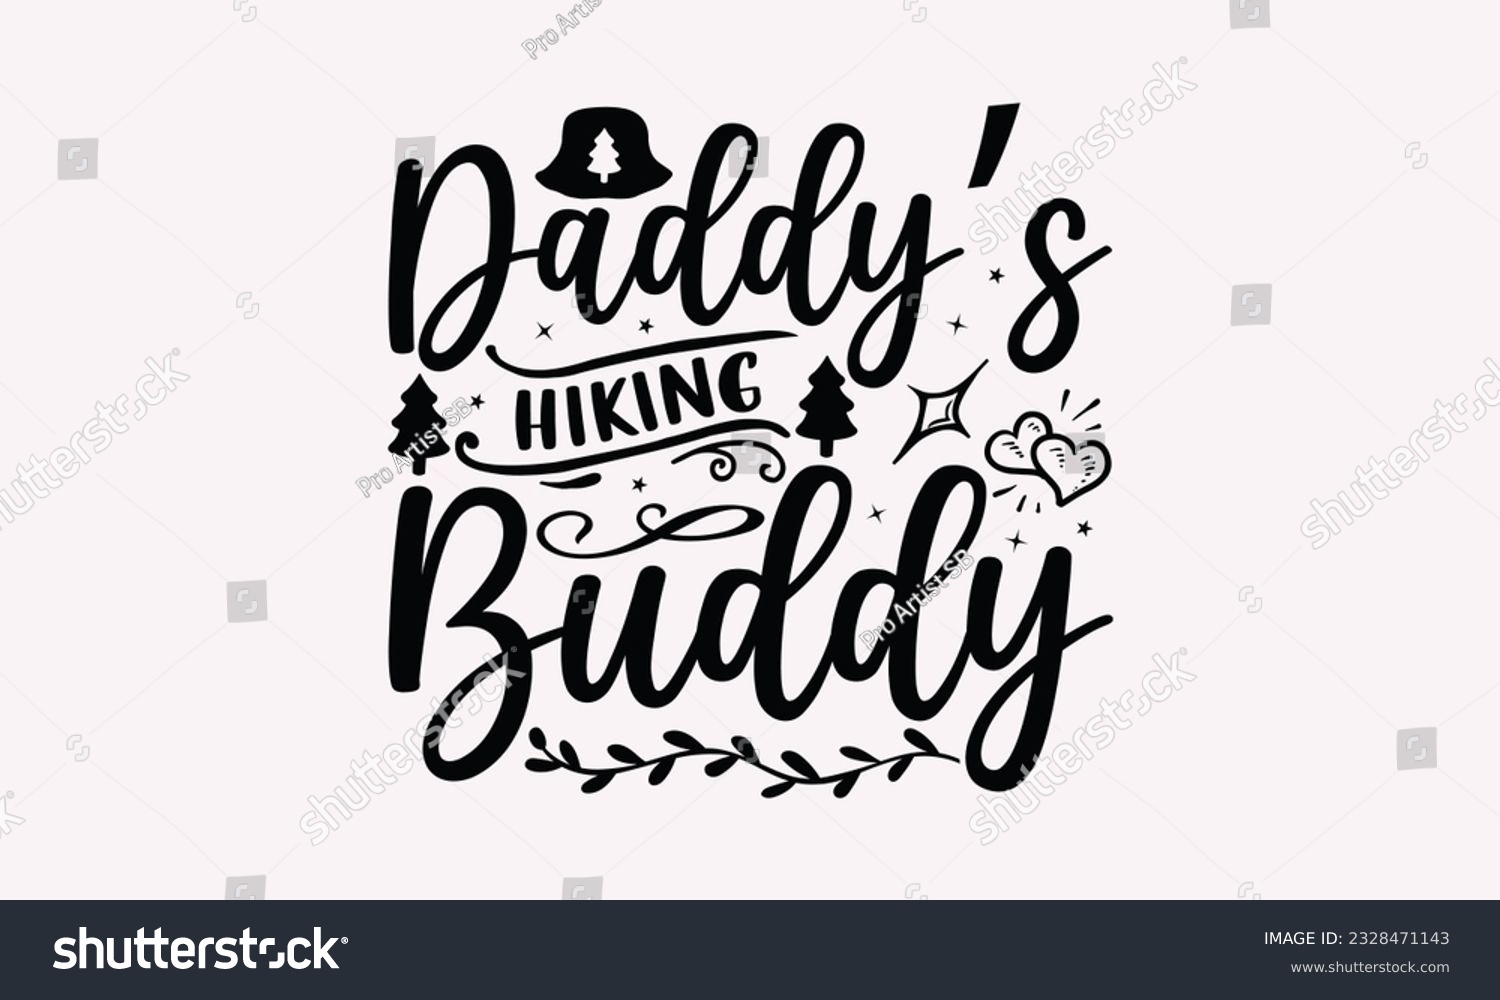 SVG of Daddy’s hiking buddy - Camping SVG Design, Campfire T-shirt Design, Sign Making, Card Making, Scrapbooking, Vinyl Decals and Many More. svg